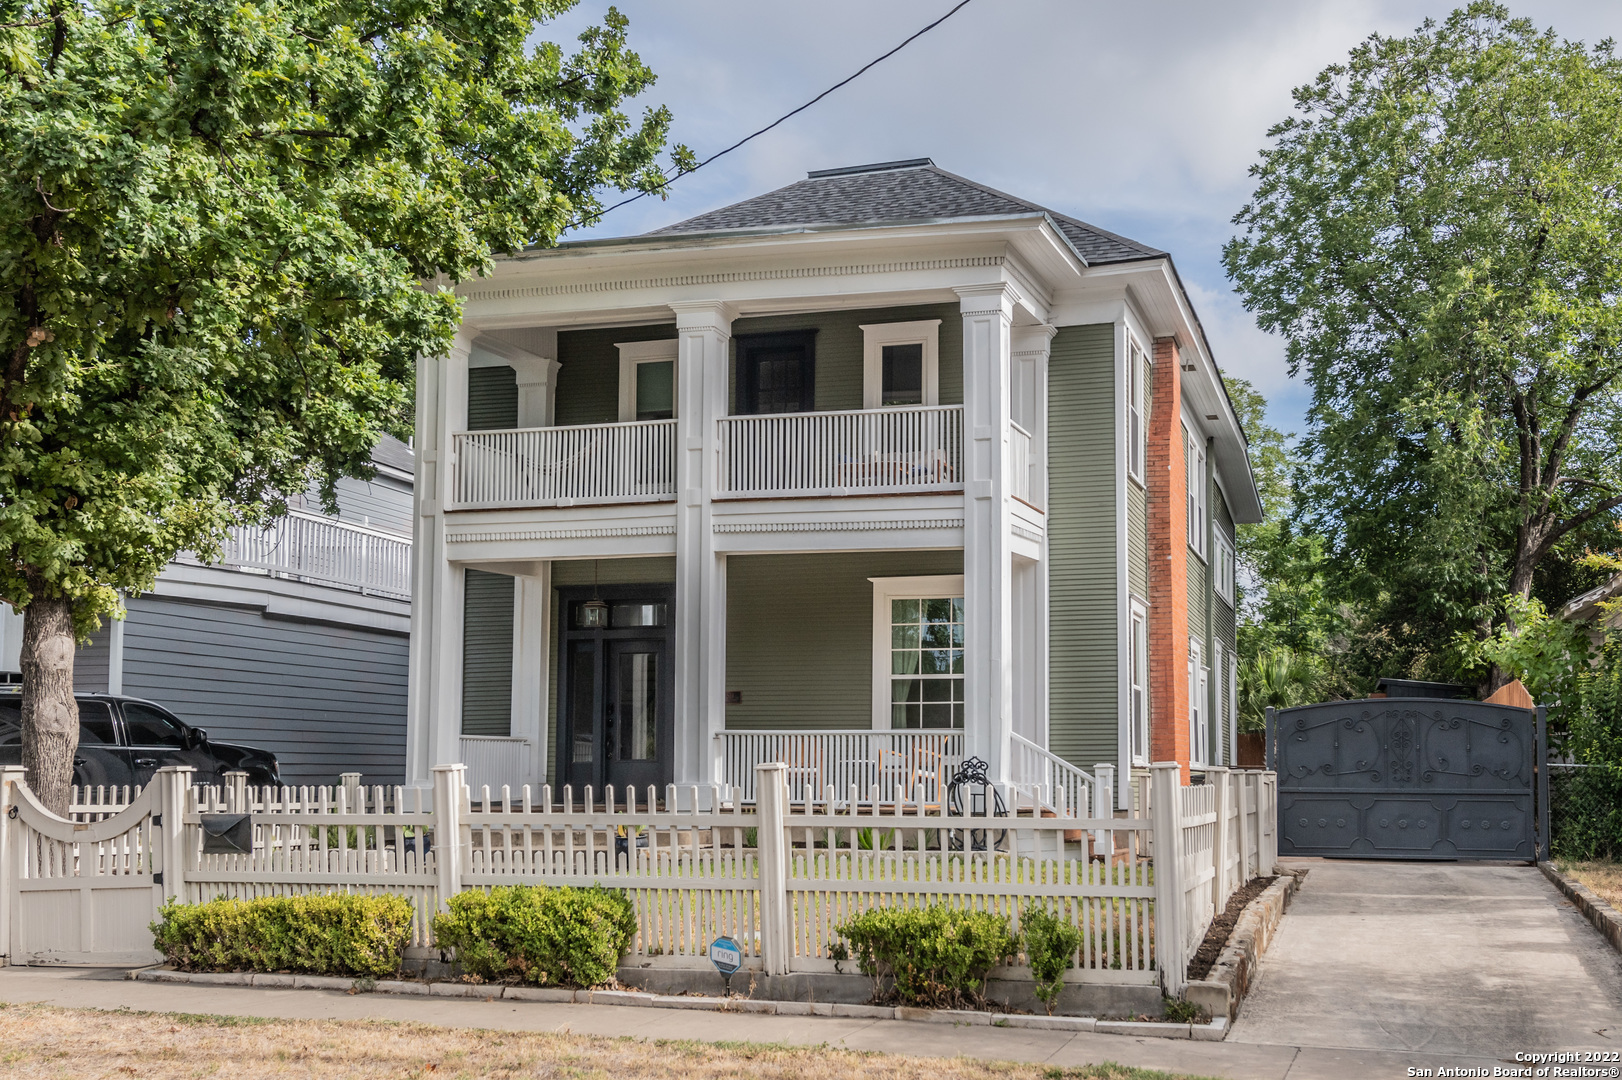 Beautifully updated 1914 character home in the Alta Vista neighborhood. Historic charm and modern updates mix seamlessly in this 4 bedroom 2.5 bath home that features 11 foot ceilings, original hardwood floors, 2 prominent fireplaces outfitted with custom-made caps, a meticulously remodeled kitchen (including an auxiliary kitchen/library space and an oversized walk-in pantry), beautiful crown molding and tray ceilings, and an upstairs covered deck with views of downtown. The secluded backyard includes a 36 foot pool with surrounding pavestone patio and professional landscaping with automatic sprinkler system; all surrounded by a new 8 foot privacy fence with an electric iron gate. New roof, exterior paint, and new double-paned windows throughout! Located just 5 minutes from the Pearl. Come see the gem of Alta Vista!